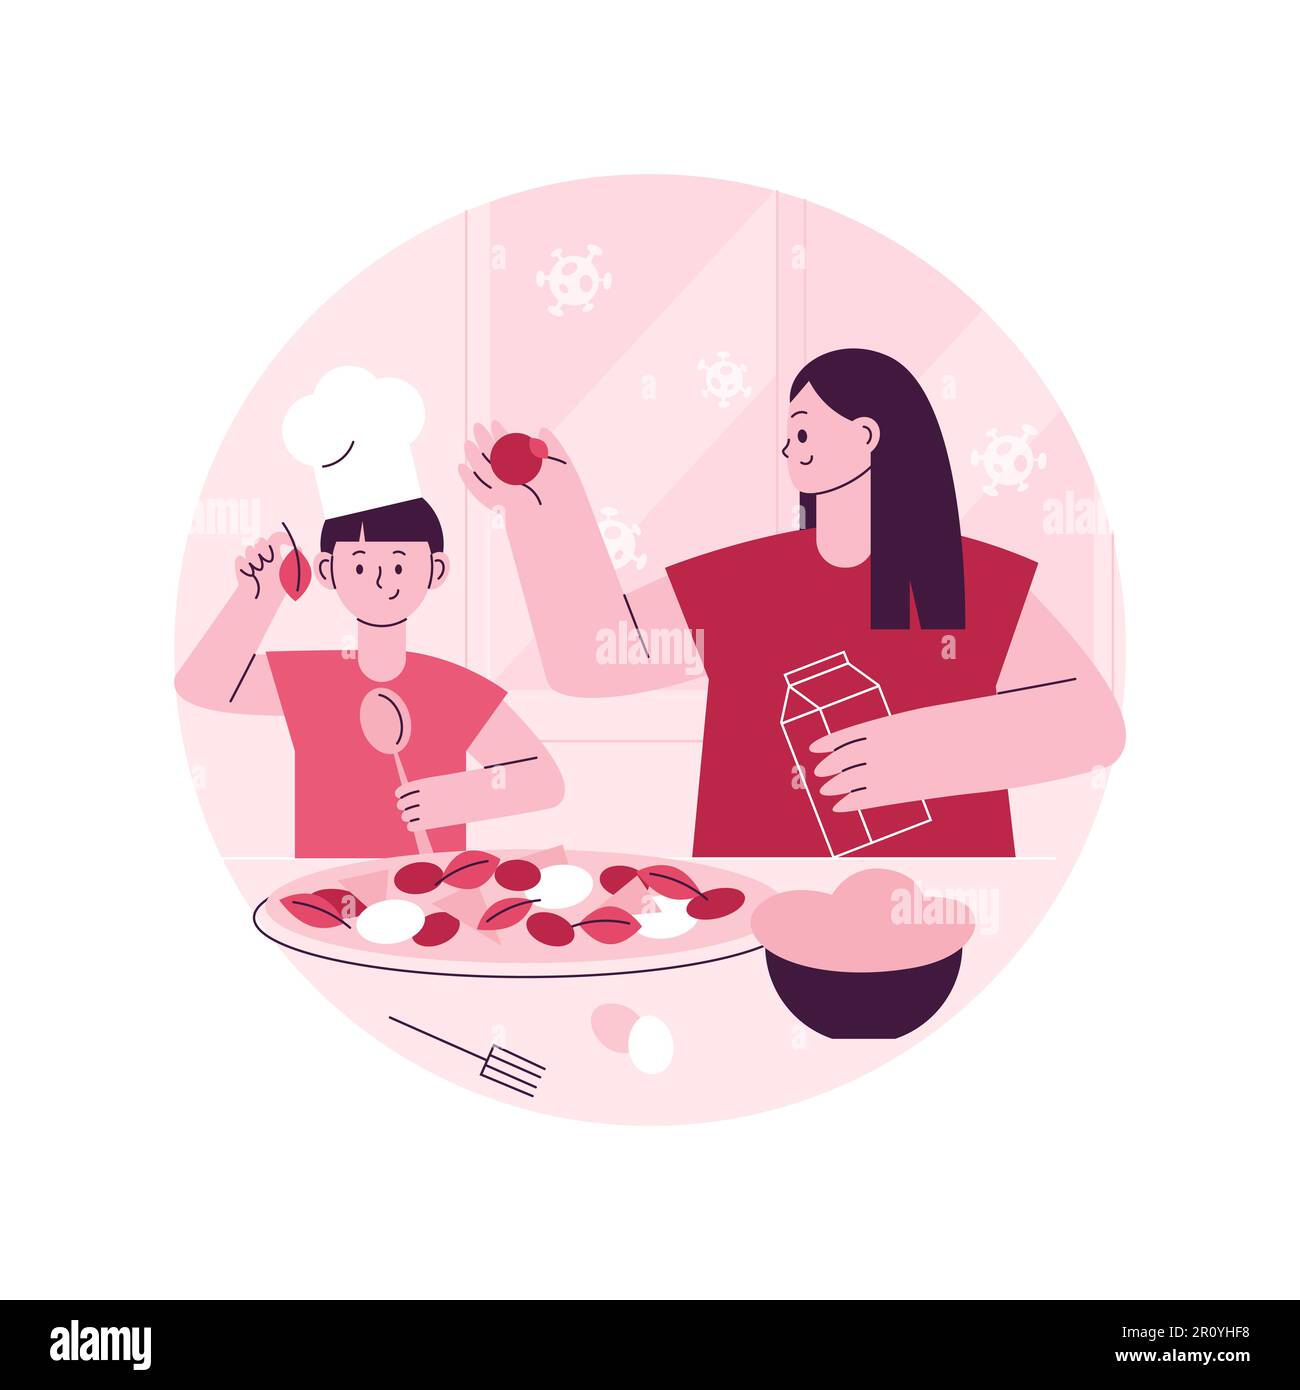 Bake together abstract concept vector illustration. Family fun during quarantine, home sitting ideas, spending time together during isolation, adults baking with children abstract metaphor. Stock Vector